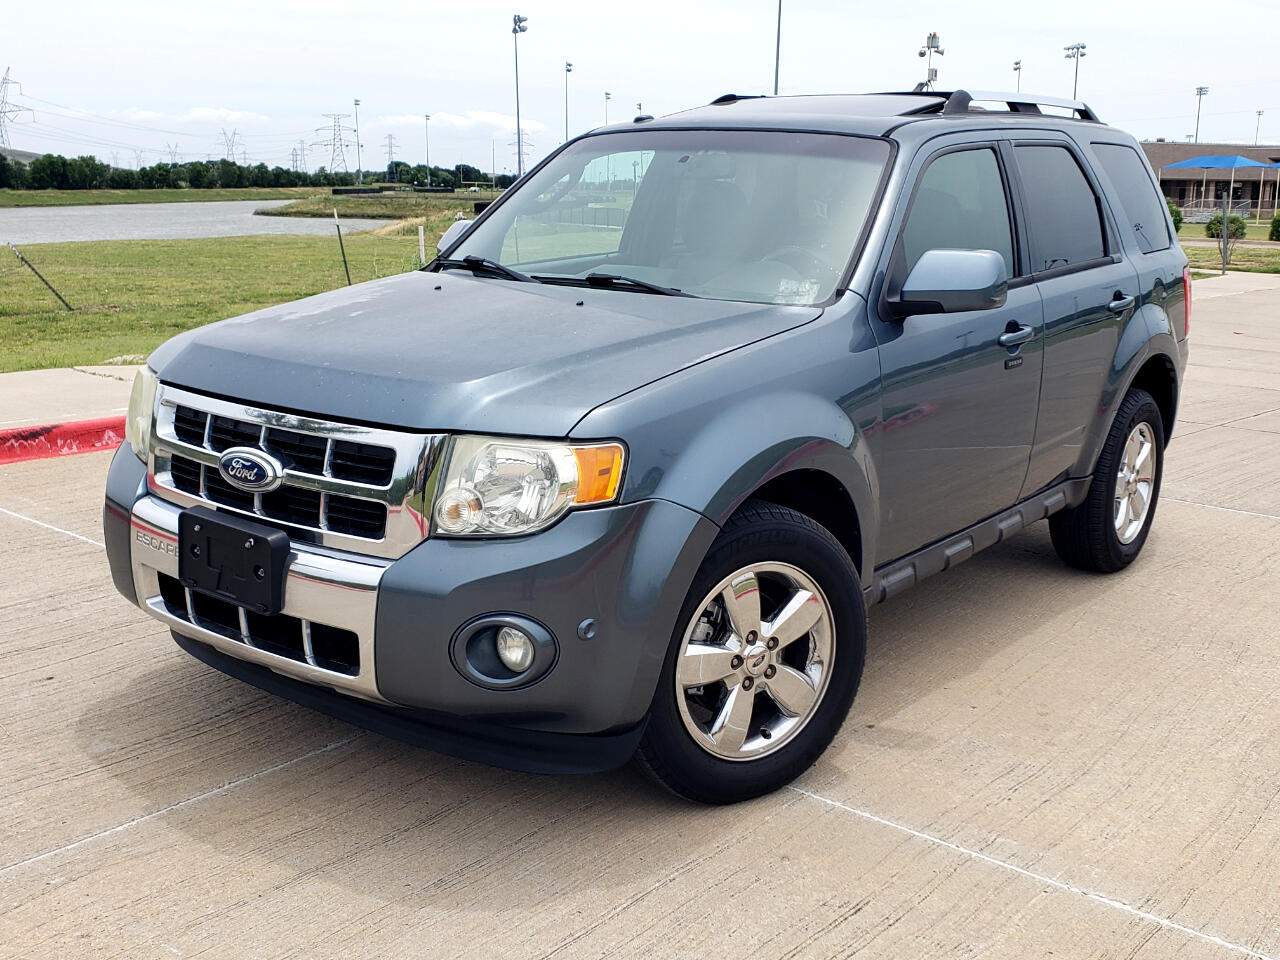 Used Ford Escape Lewisville Tx